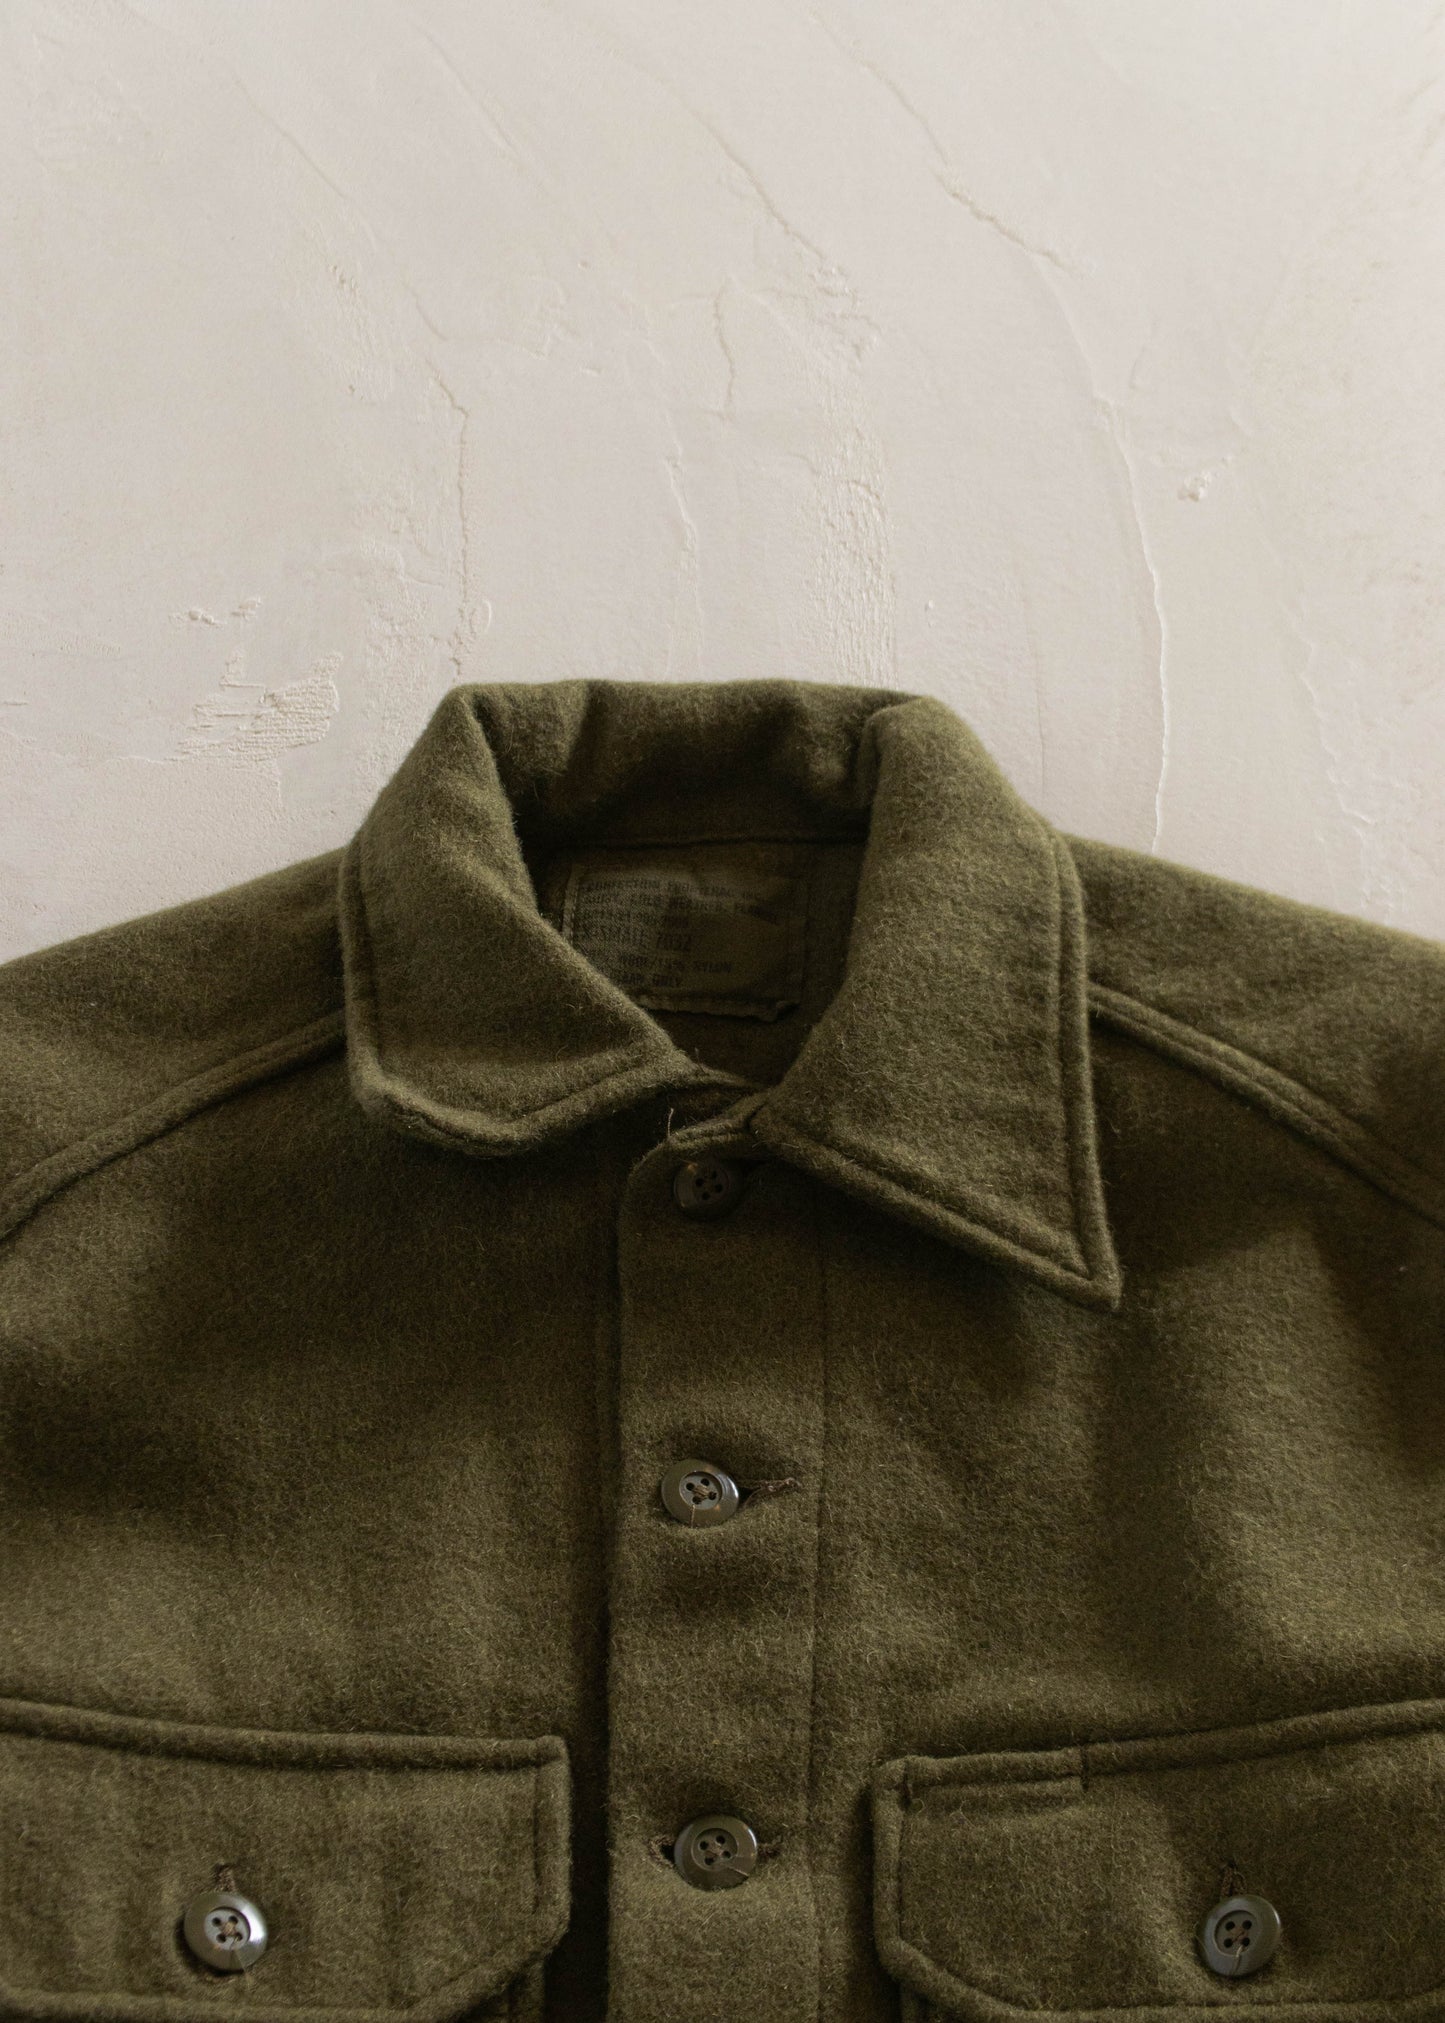 1980s Military Wool Button Up Shirt Size S/M